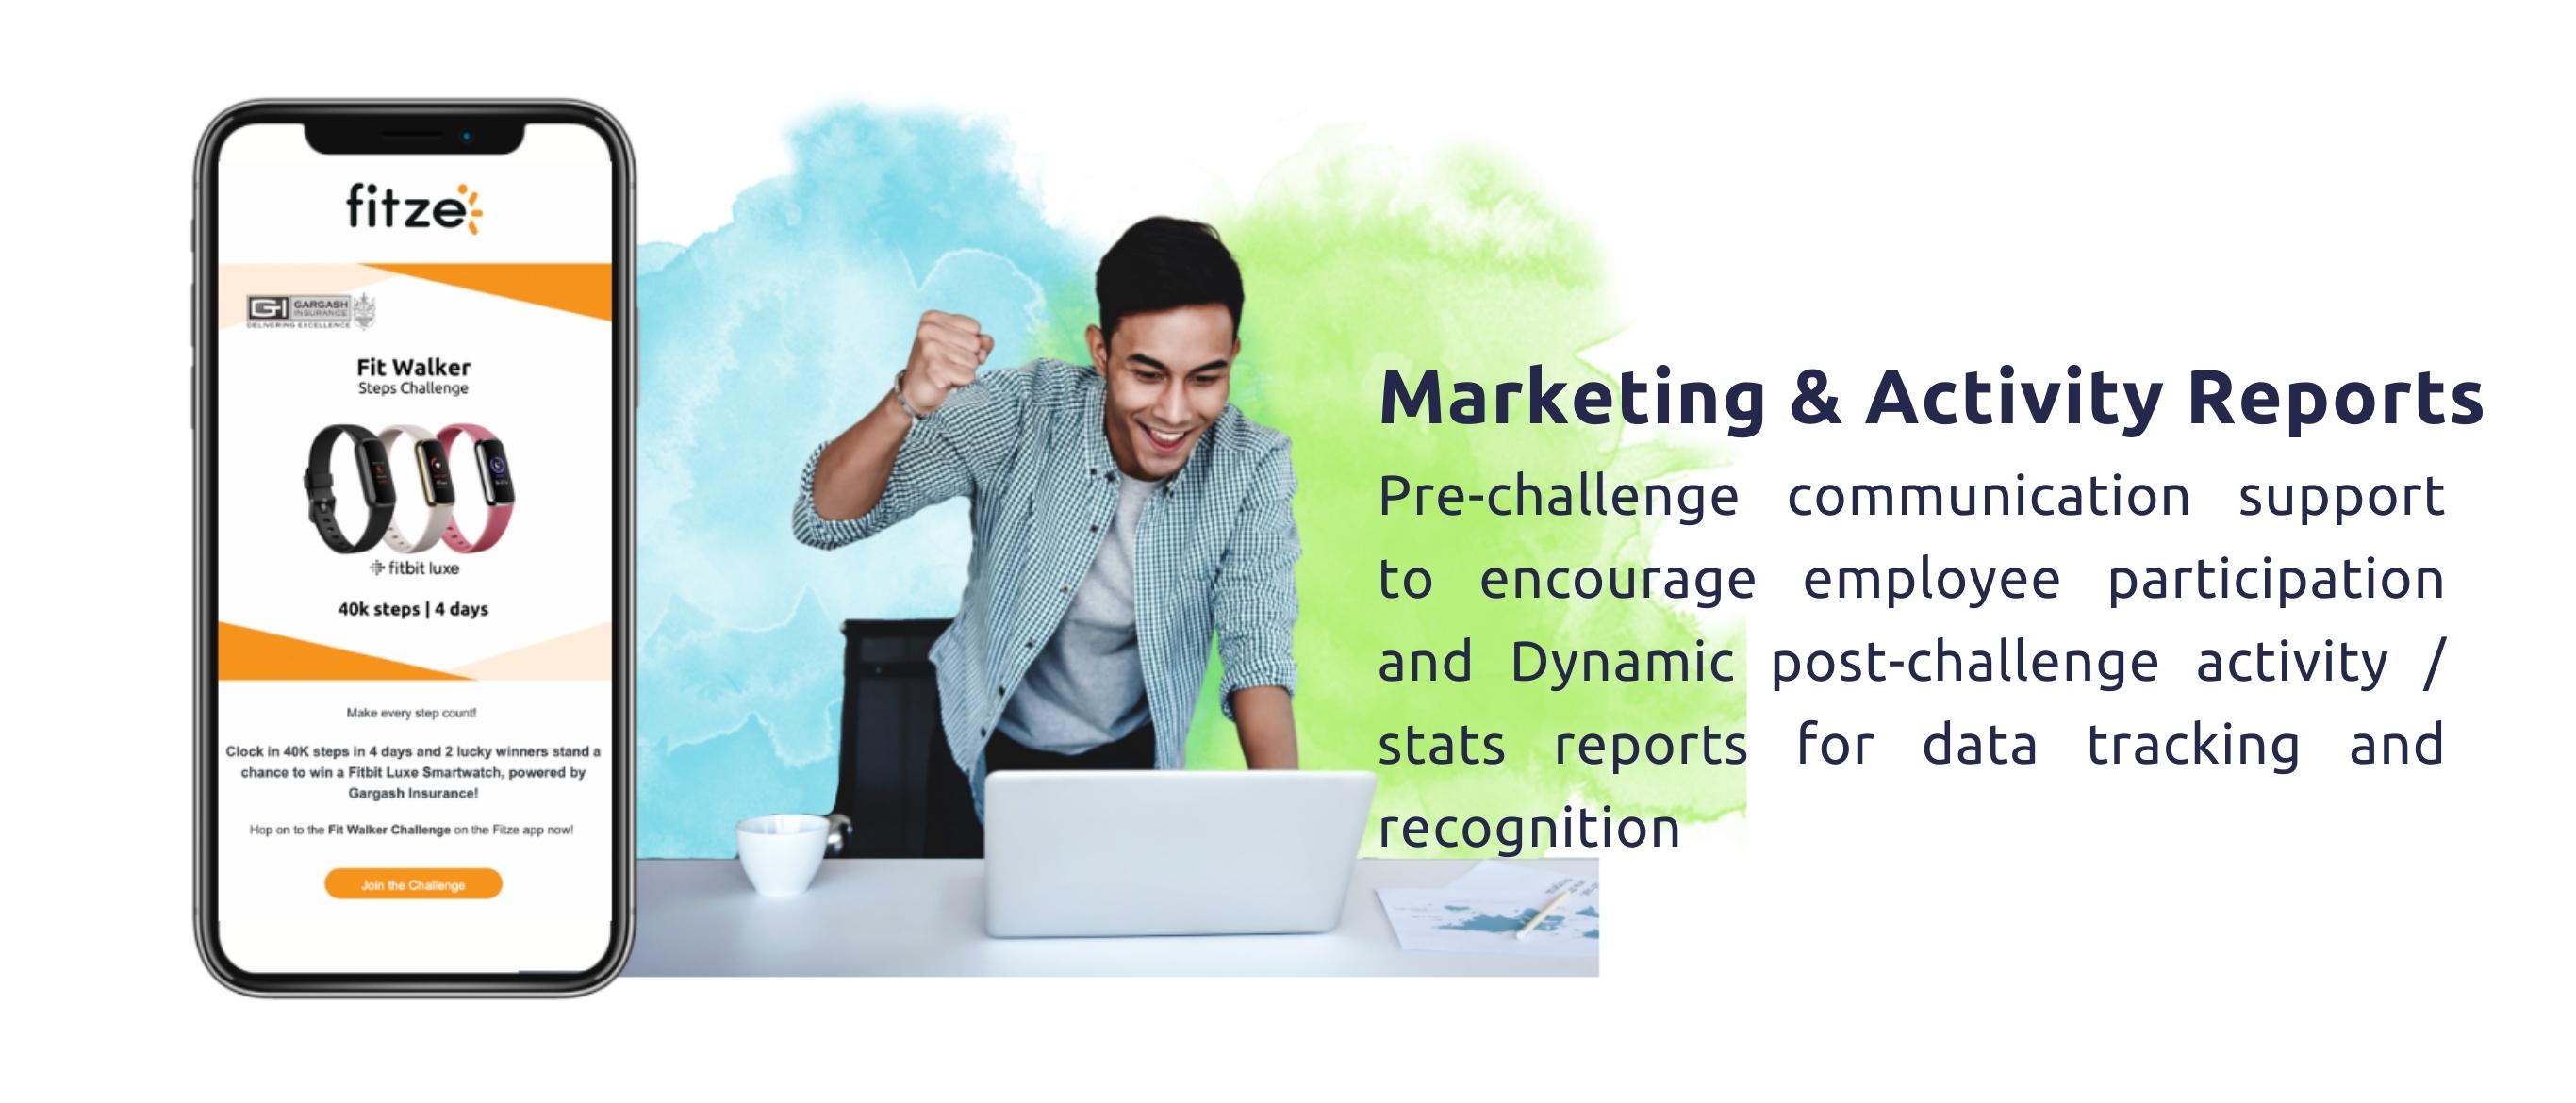 Marketing & Activity Reports . Pre-challenge communication support  to encourage employee participation and Dynamic post-challenge activity / stats reports for data tracking and recognition  